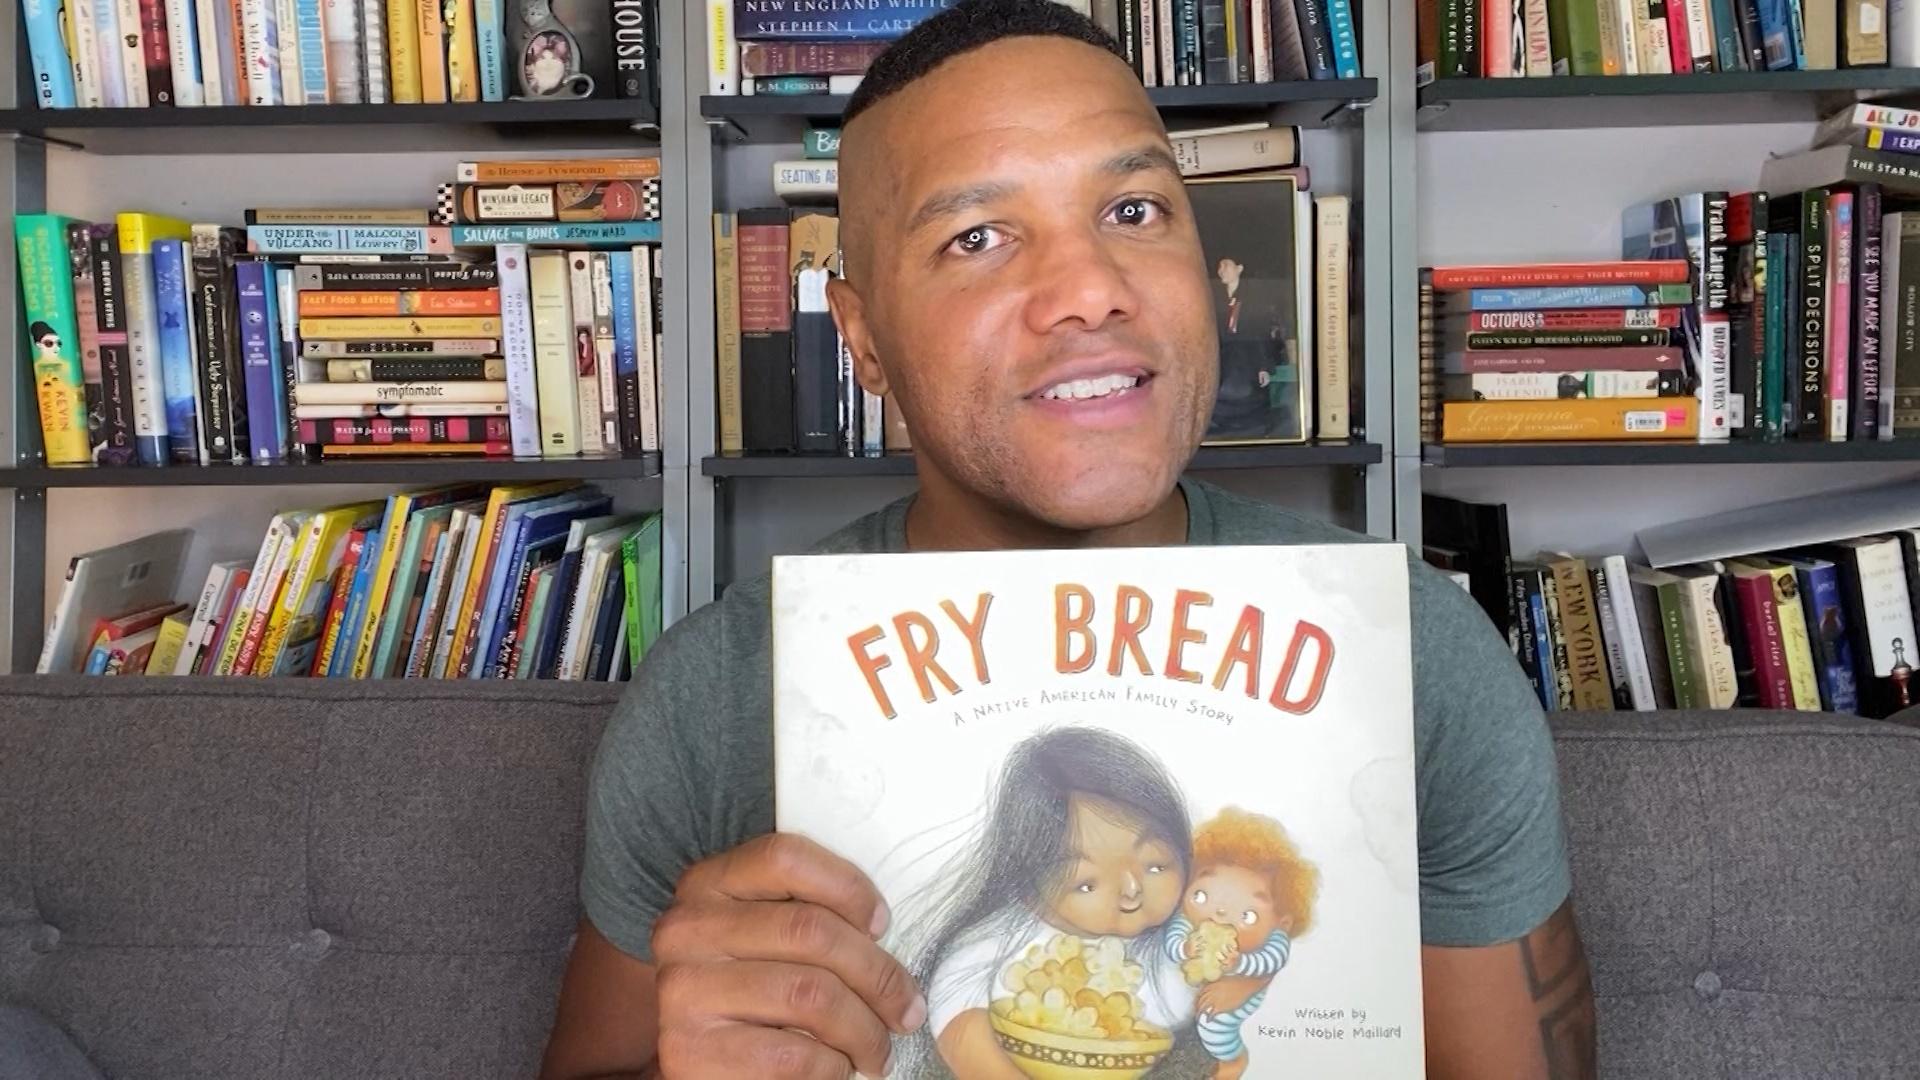 A man holding a children's book titled "Fry Bread"